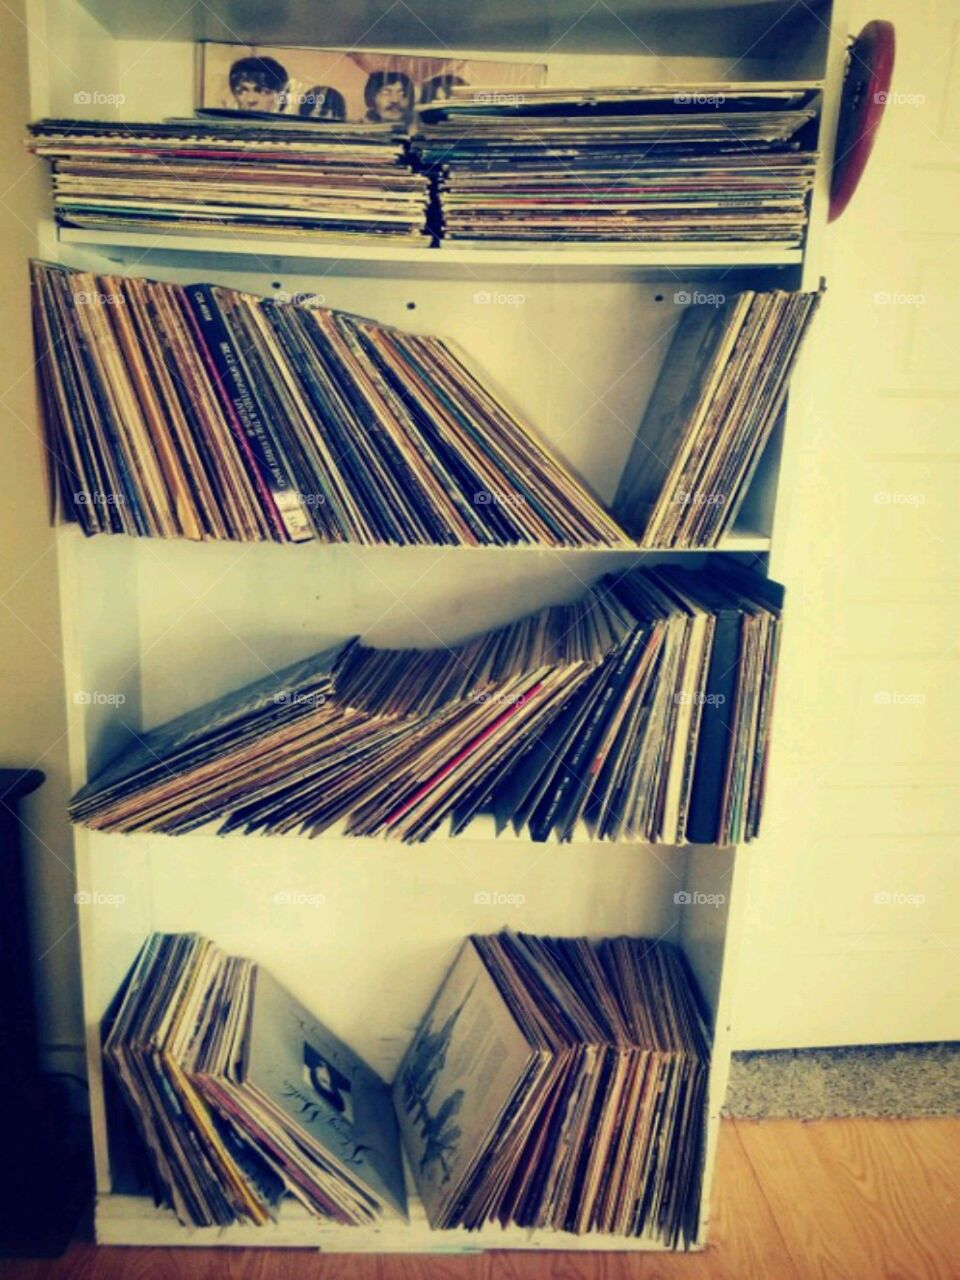 Vinyl record collection. a glimpse into my love for vinyls